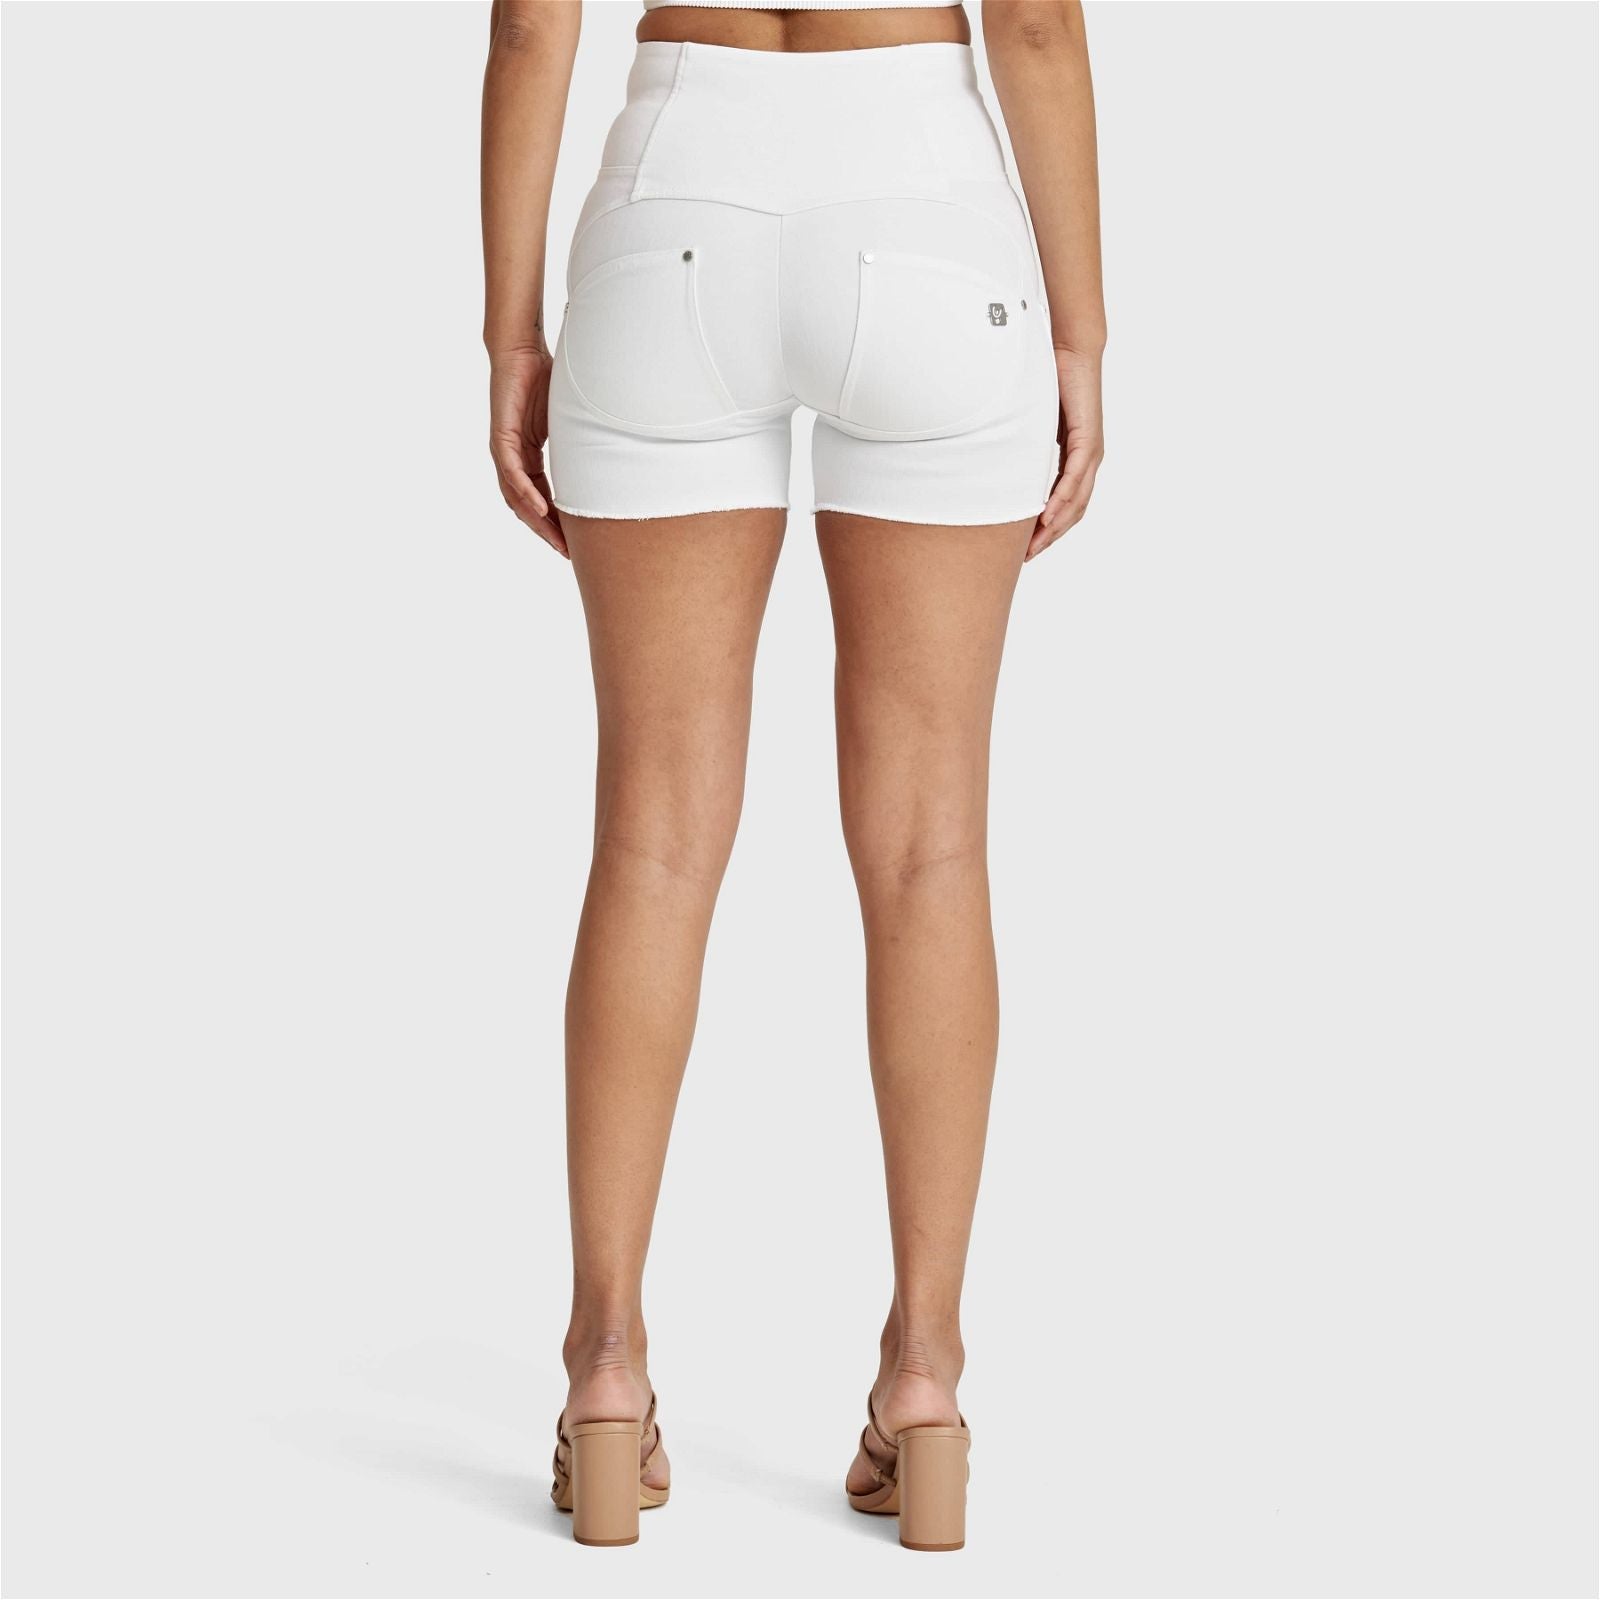 WR.UP® SNUG Jeans - 3 Button High Waisted - Shorts - White 3